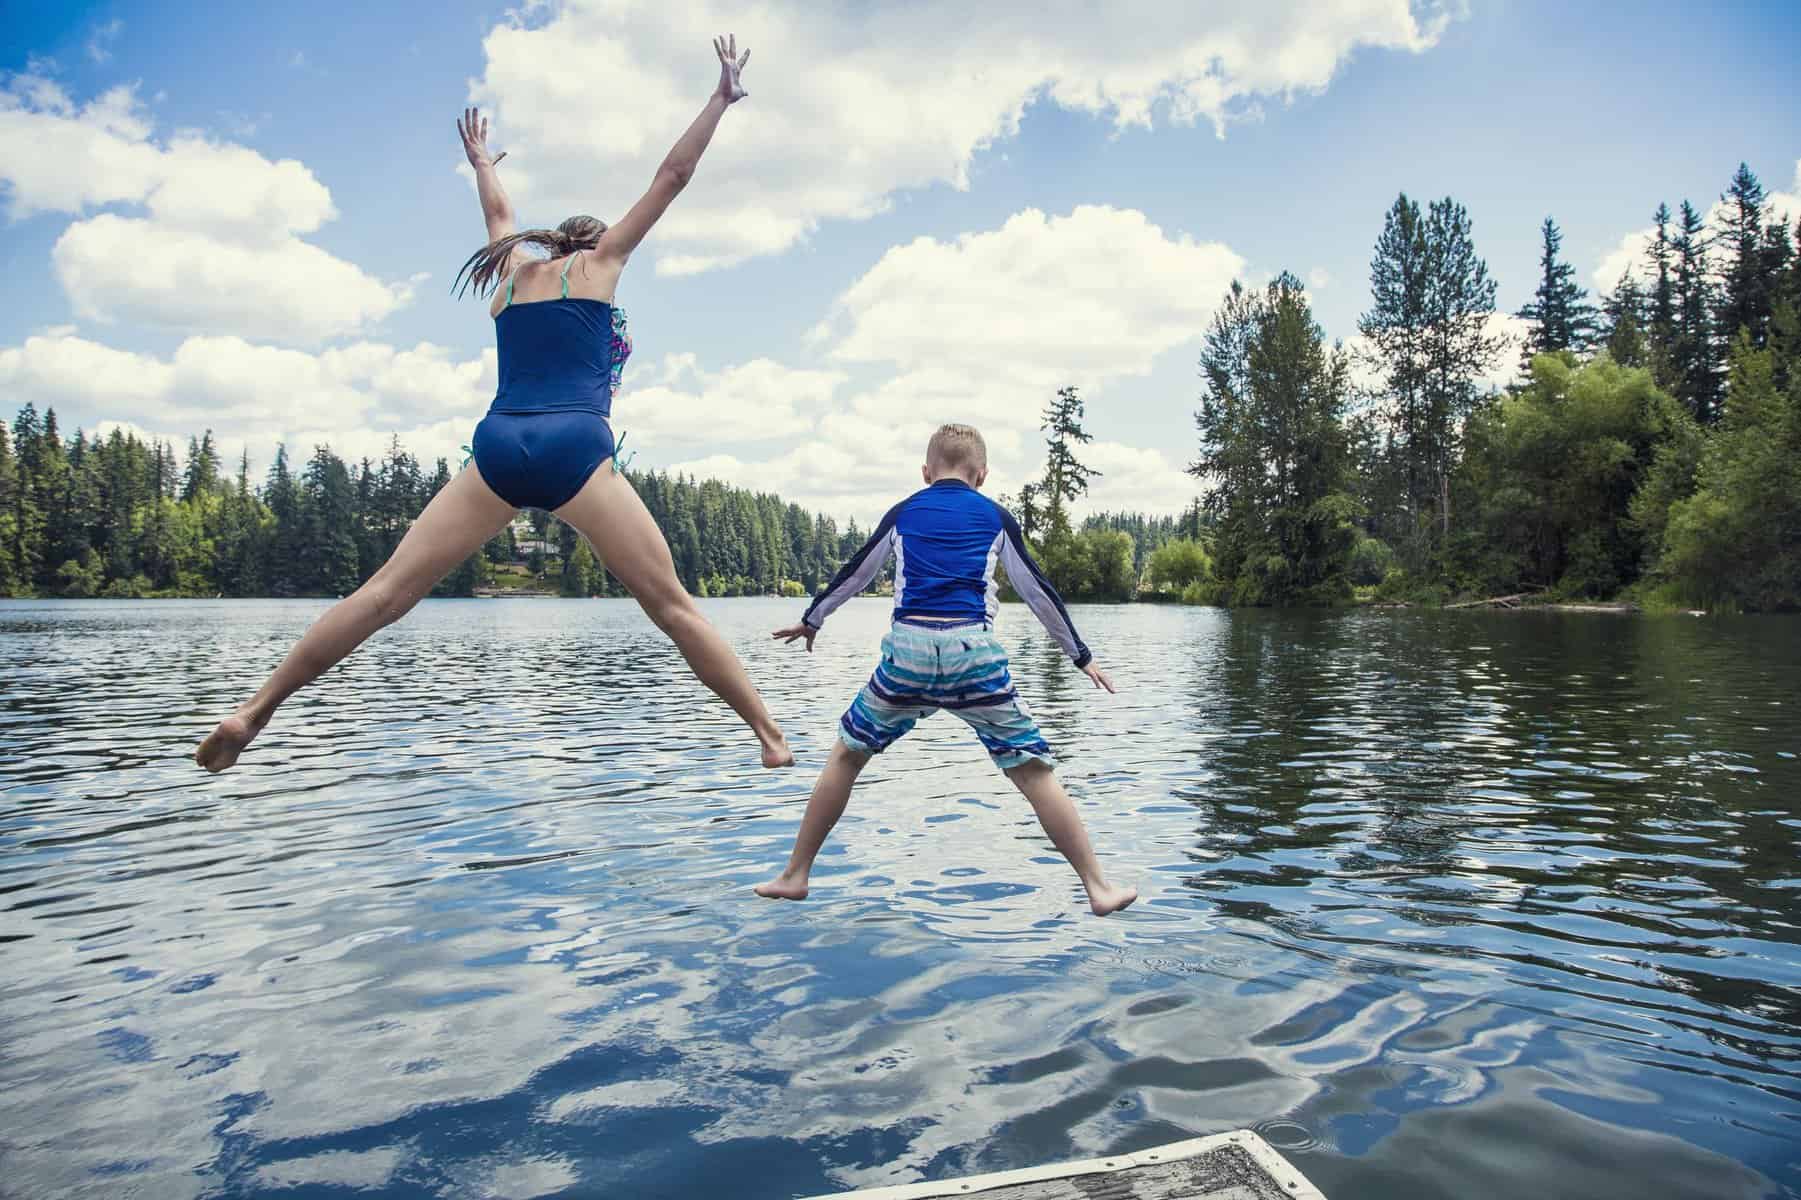 12 Best Family Summer Vacation Places in the U.S.